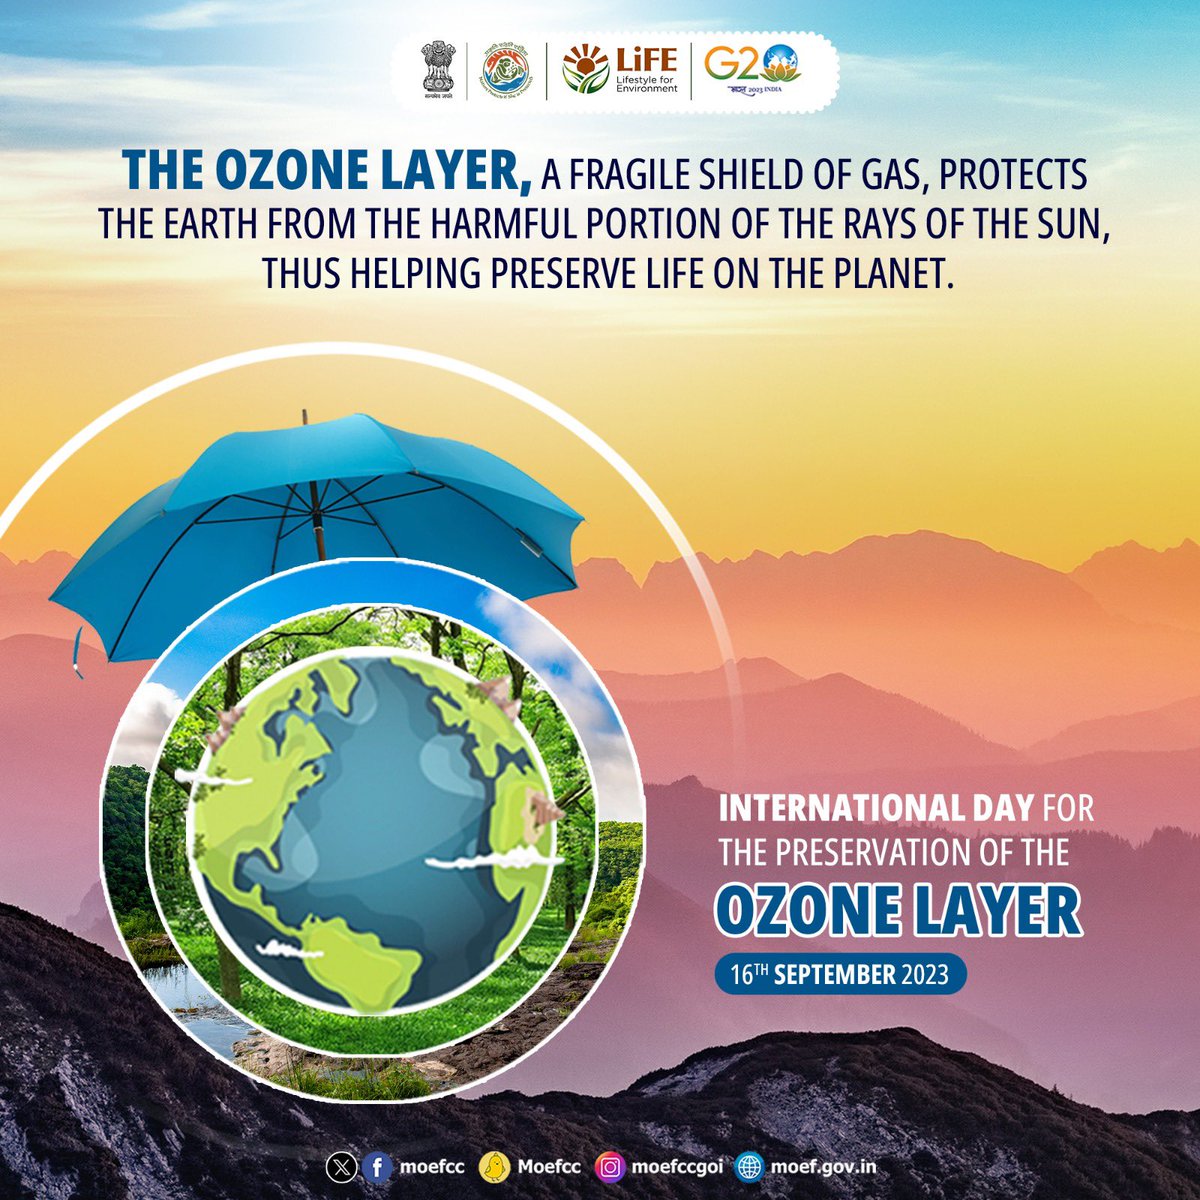 The ozone layer is a vital shield that preserves life on our planet by blocking harmful sun rays. 

Let's join together to protect this precious gift for future generations!

#WorldOzoneDay
#OzoneDay
#MissionLiFE
#ProPlanetPeople